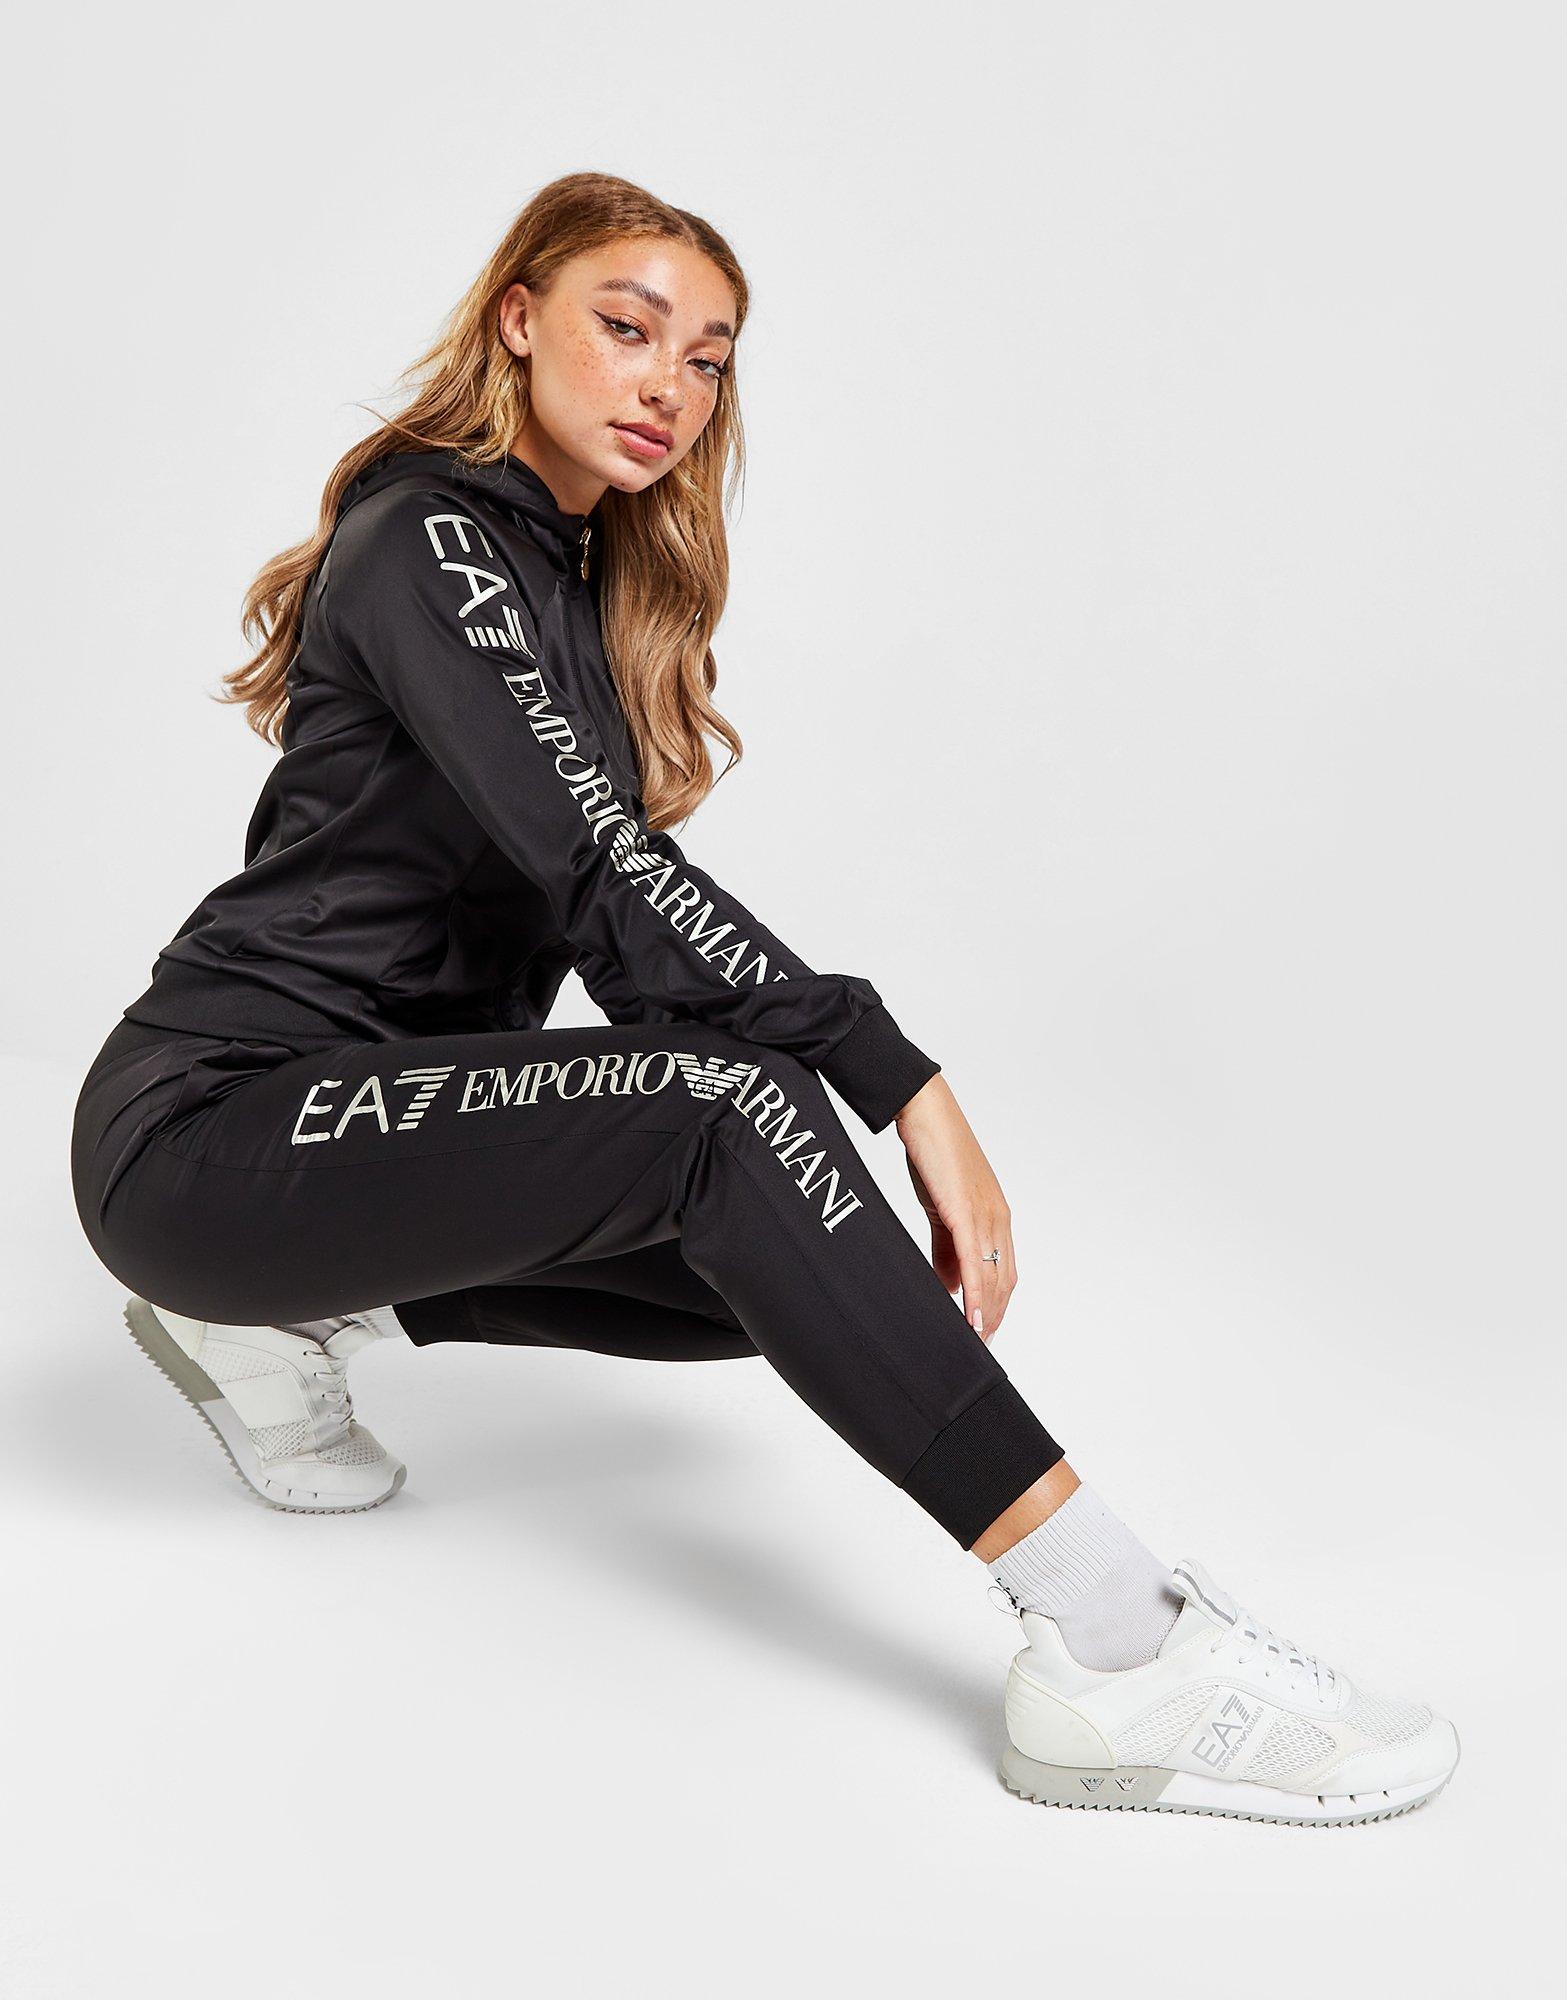 discount 93% NoName tracksuit and joggers Black M WOMEN FASHION Trousers Tracksuit and joggers Shorts 